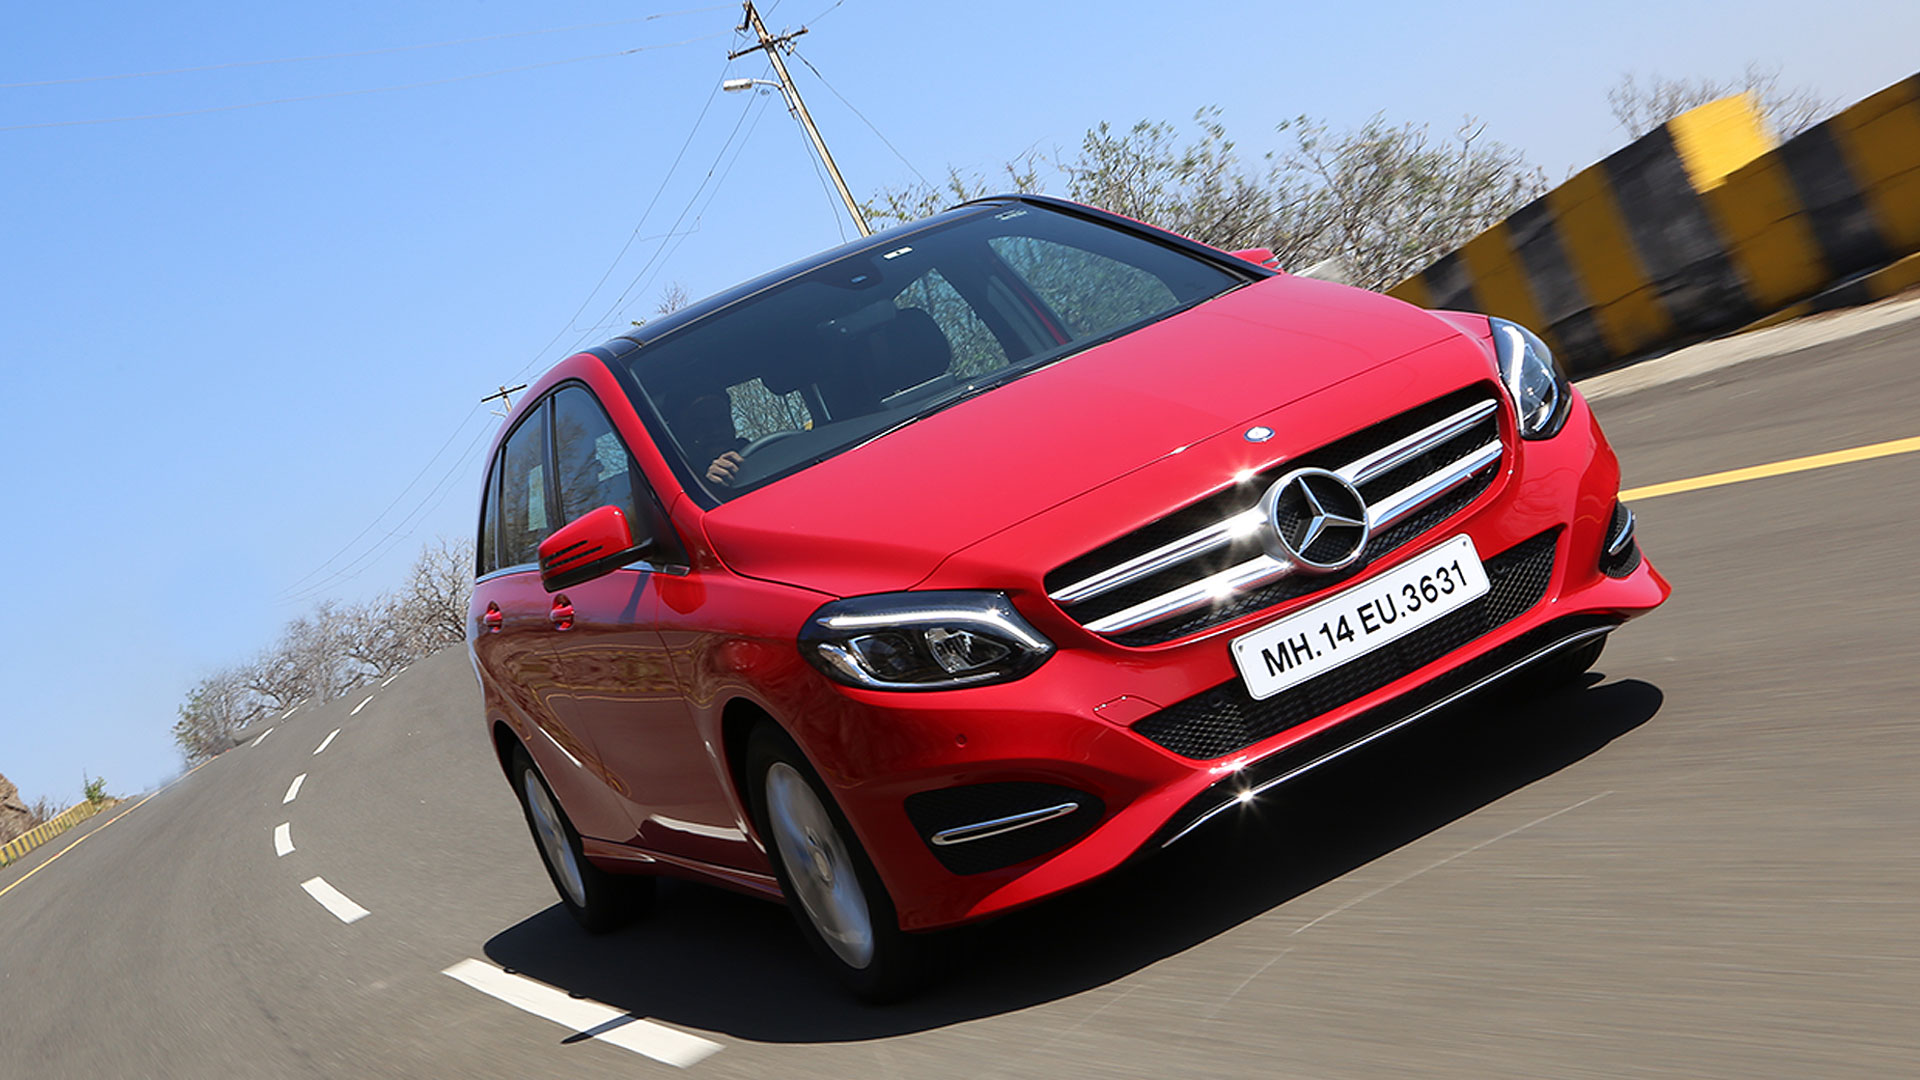 Mercedes-Benz B-Class 2015 B200 CDI Sport - Price in India, Mileage,  Reviews, Colours, Specification, Images - Overdrive